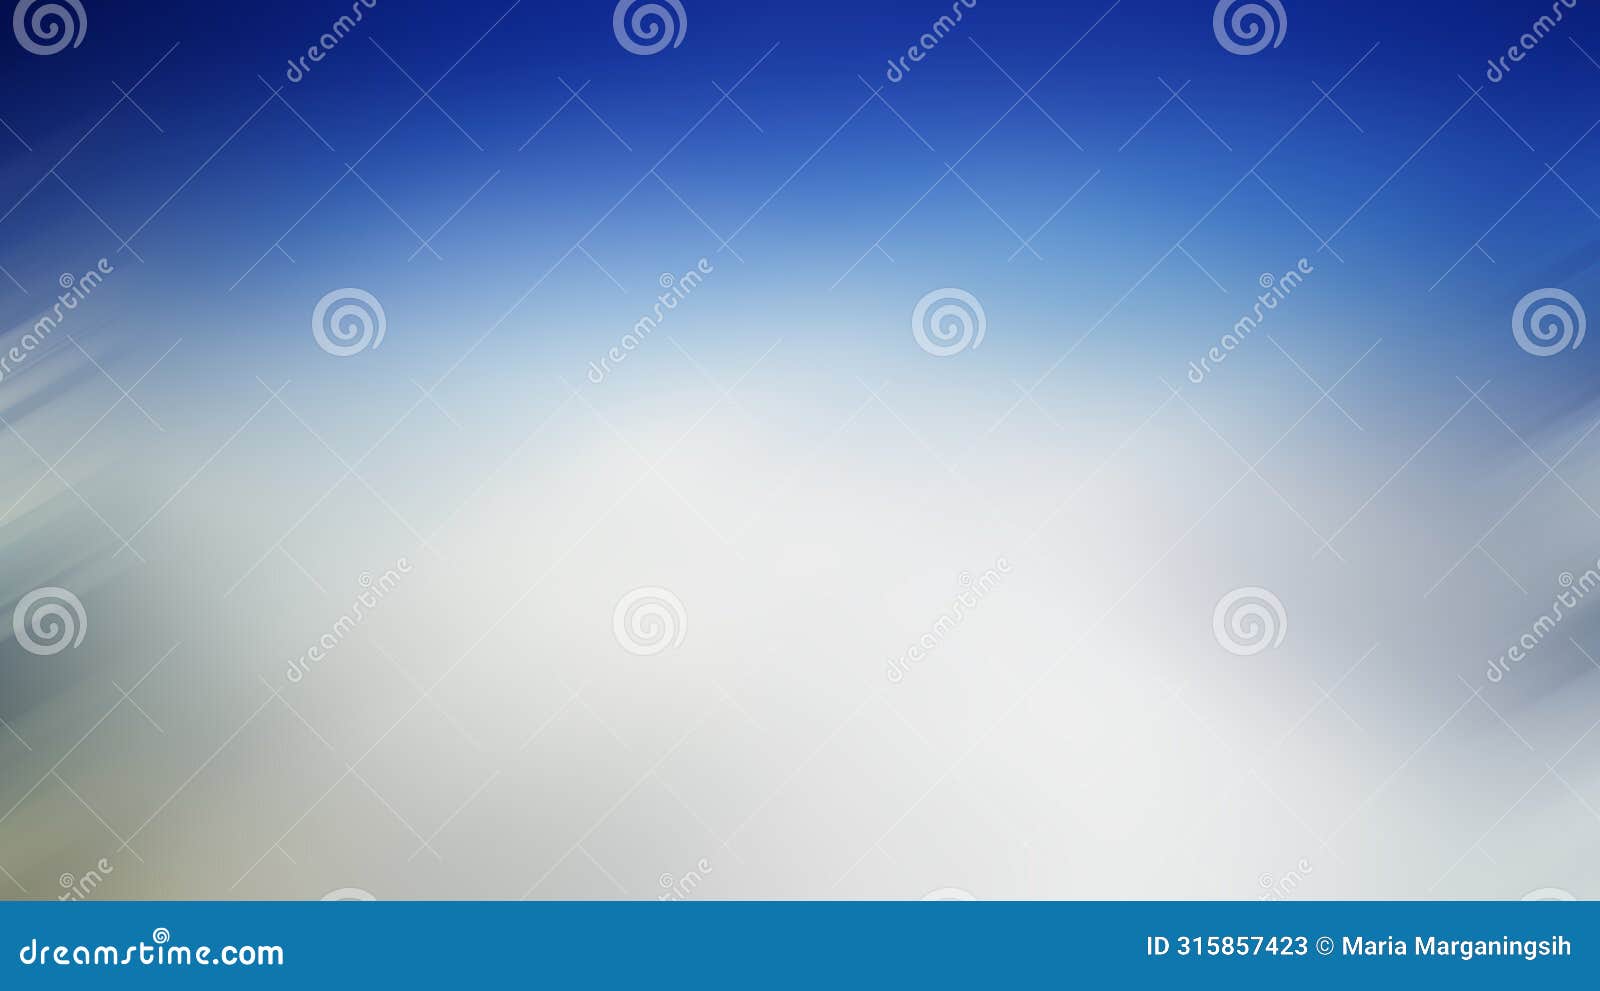 blue and white abstract backgrounds. white and gray gradation color background with half frame blue color. copy space.